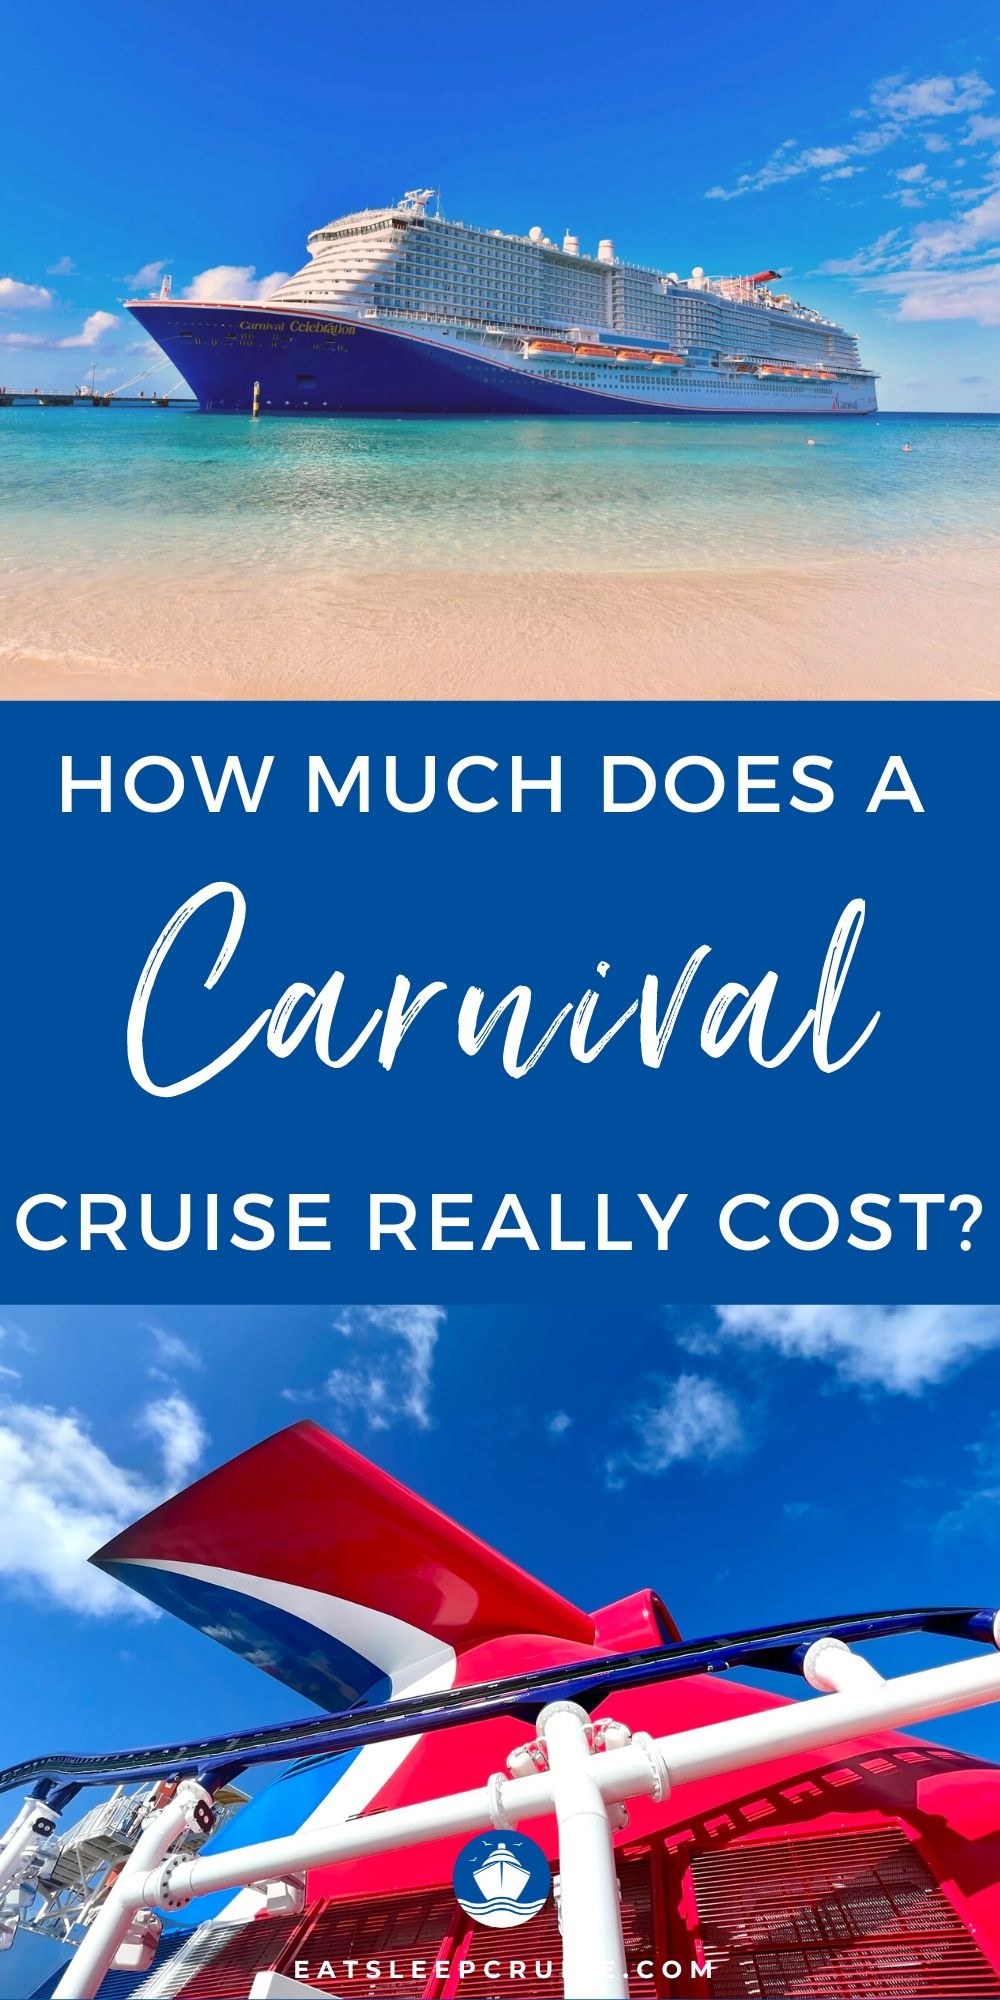 How Much Does a Carnival Cruise Cost?